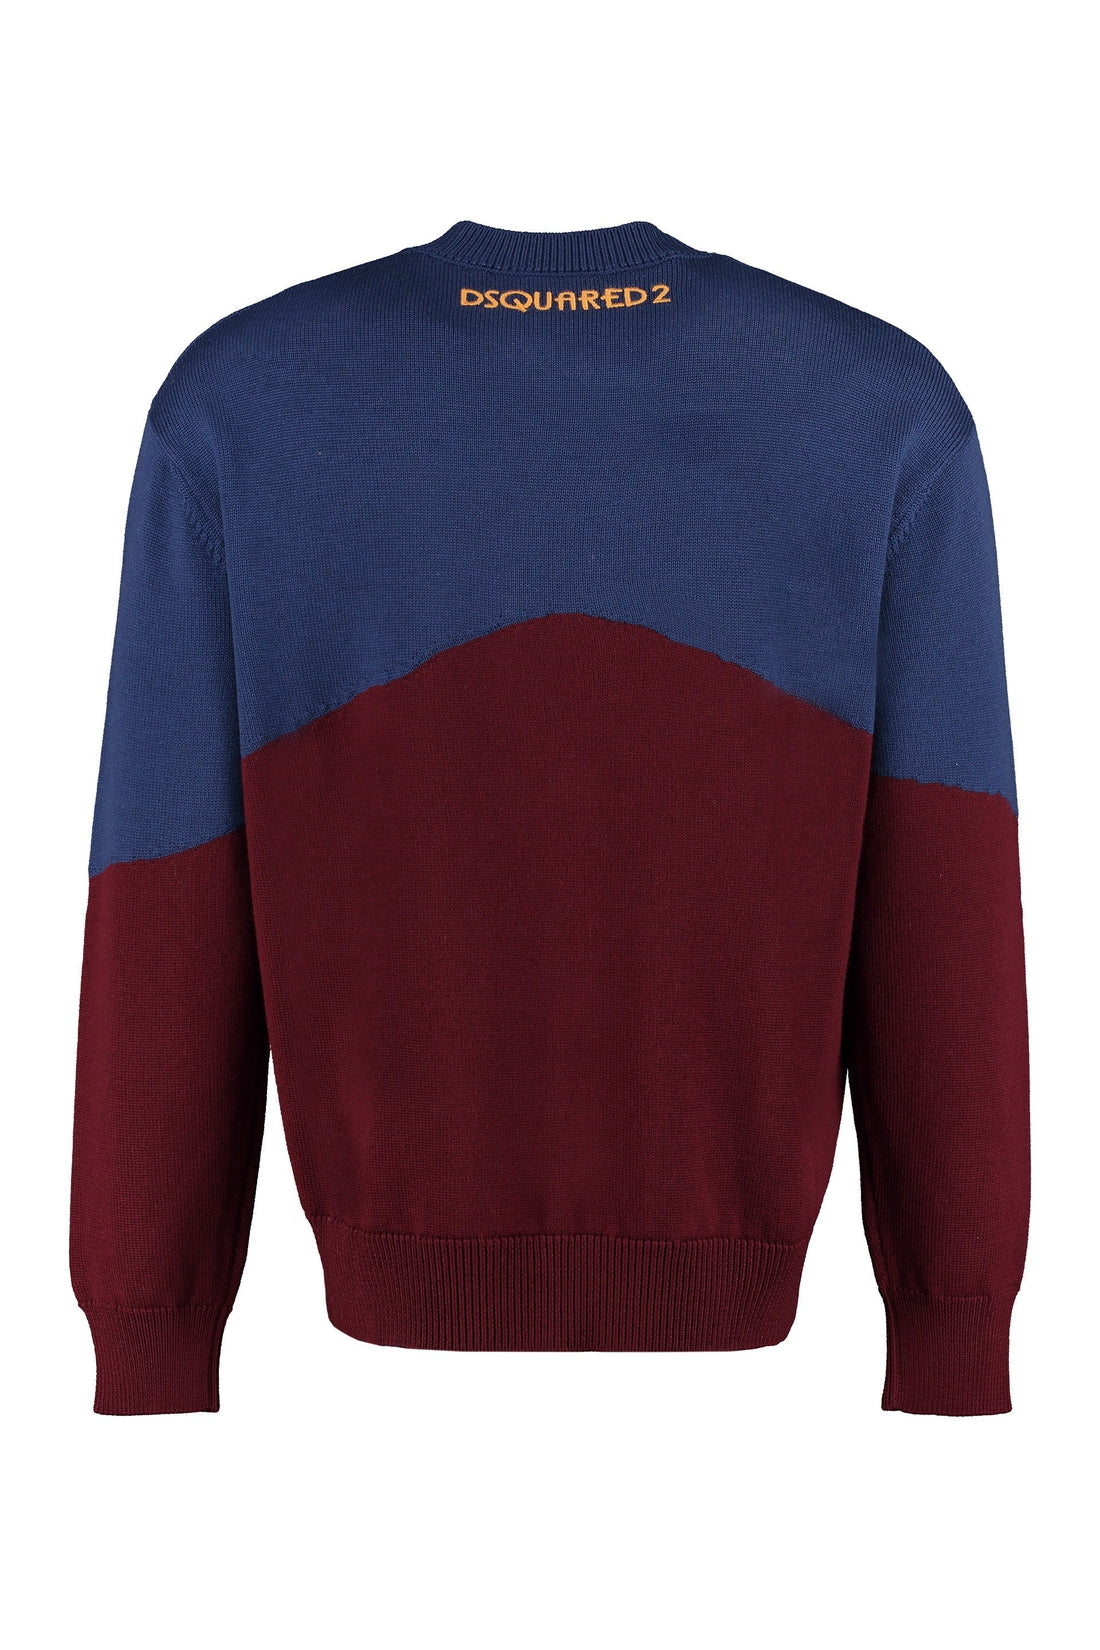 Dsquared2-OUTLET-SALE-Wool and cashmere pullover-ARCHIVIST